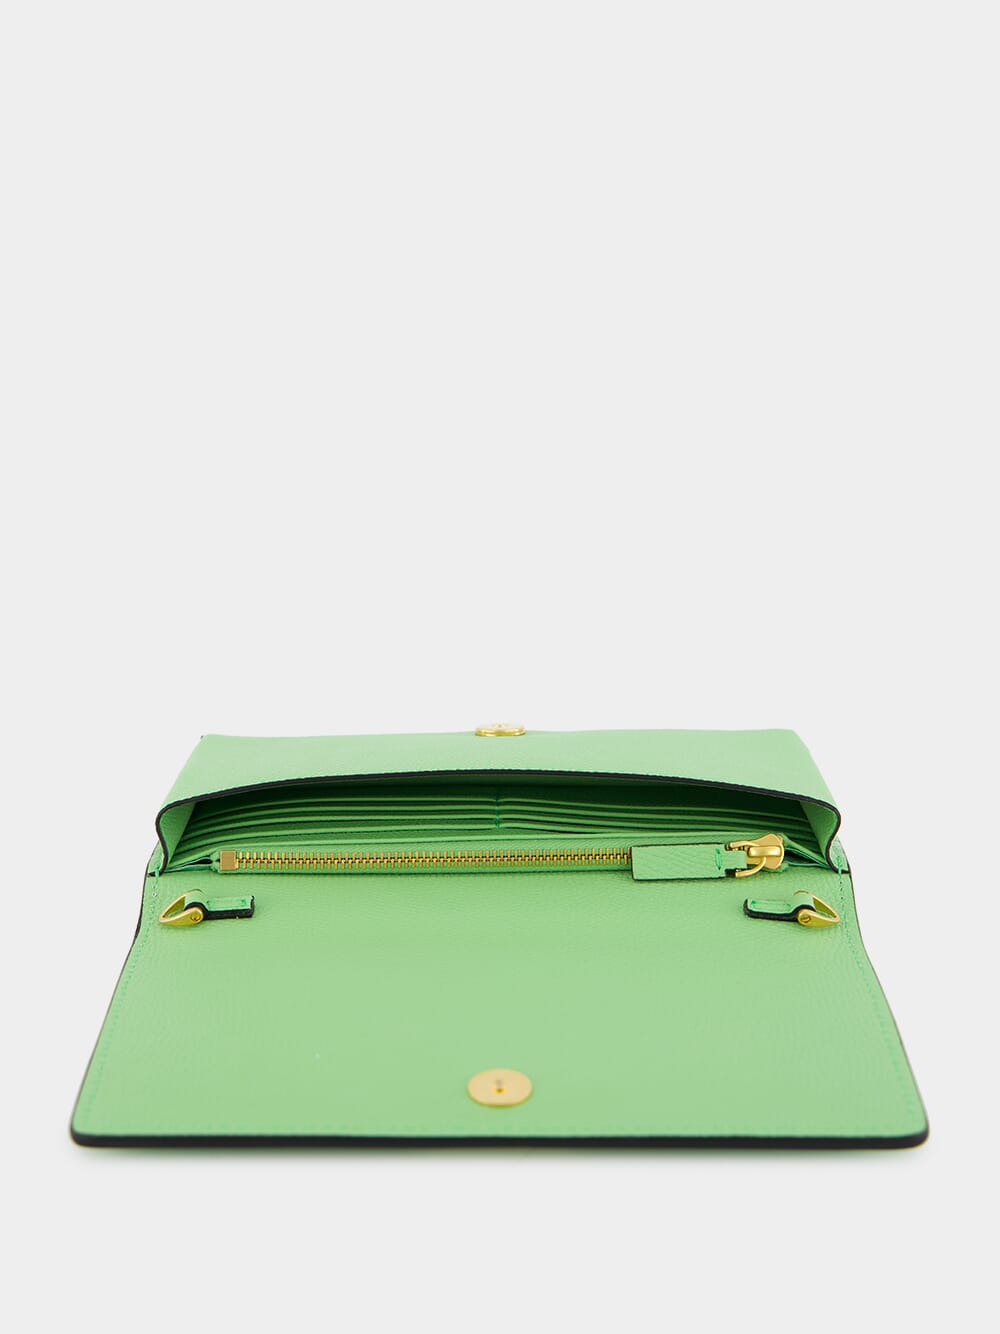 VLogo Green Wallet-on-Chain